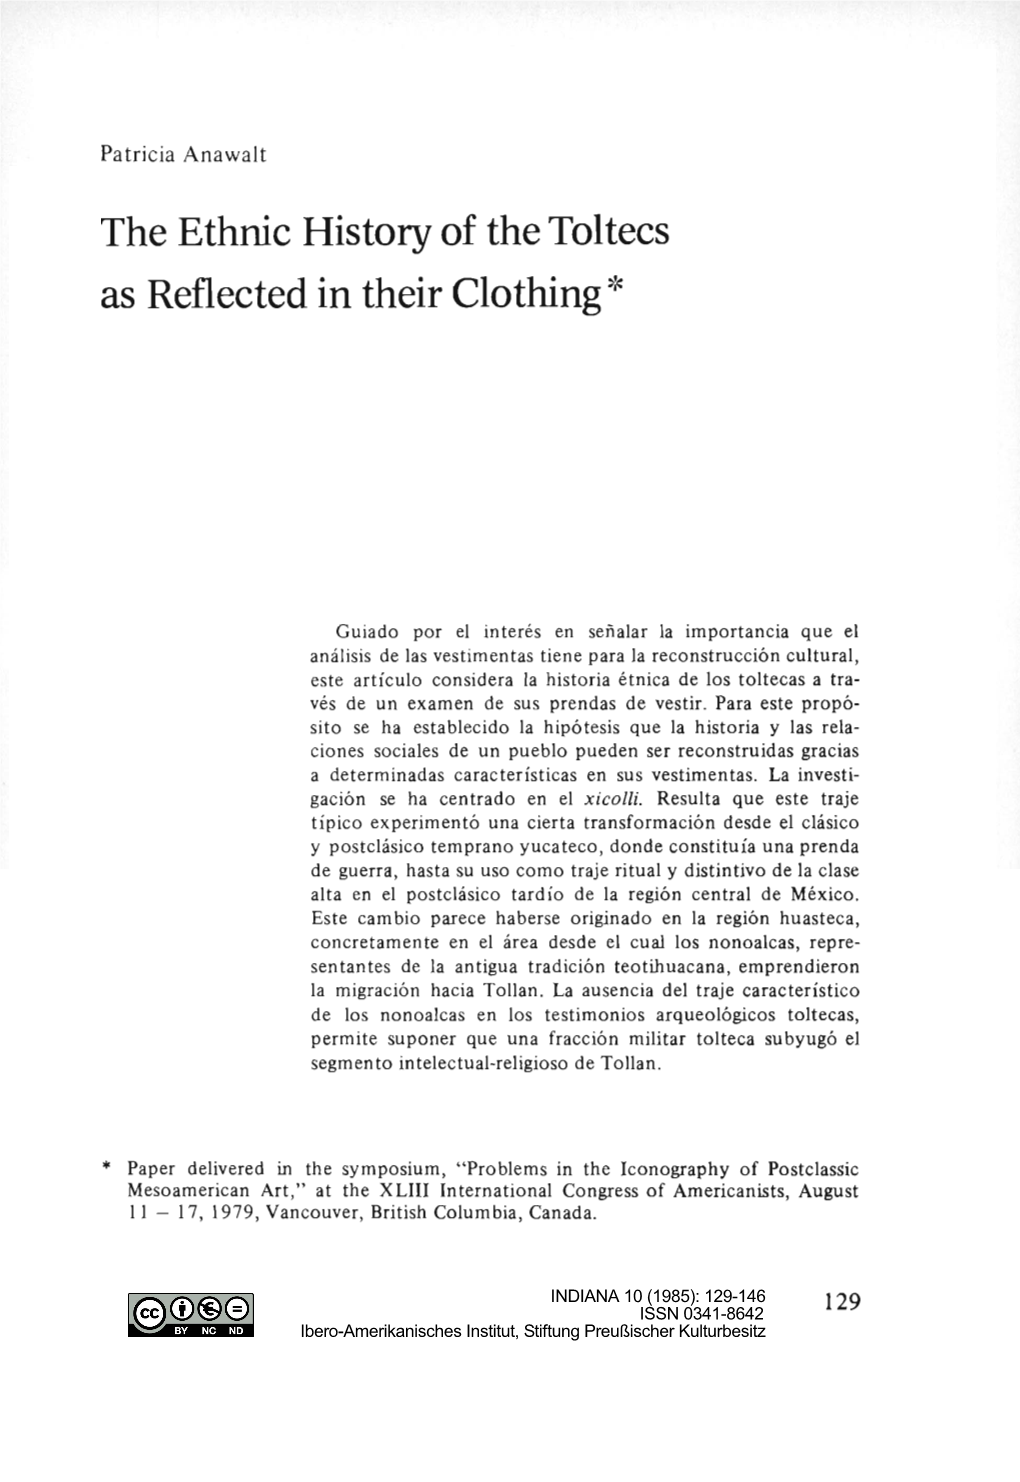 The Ethnic History of the Toltecs As Reflected in Their Clothing*